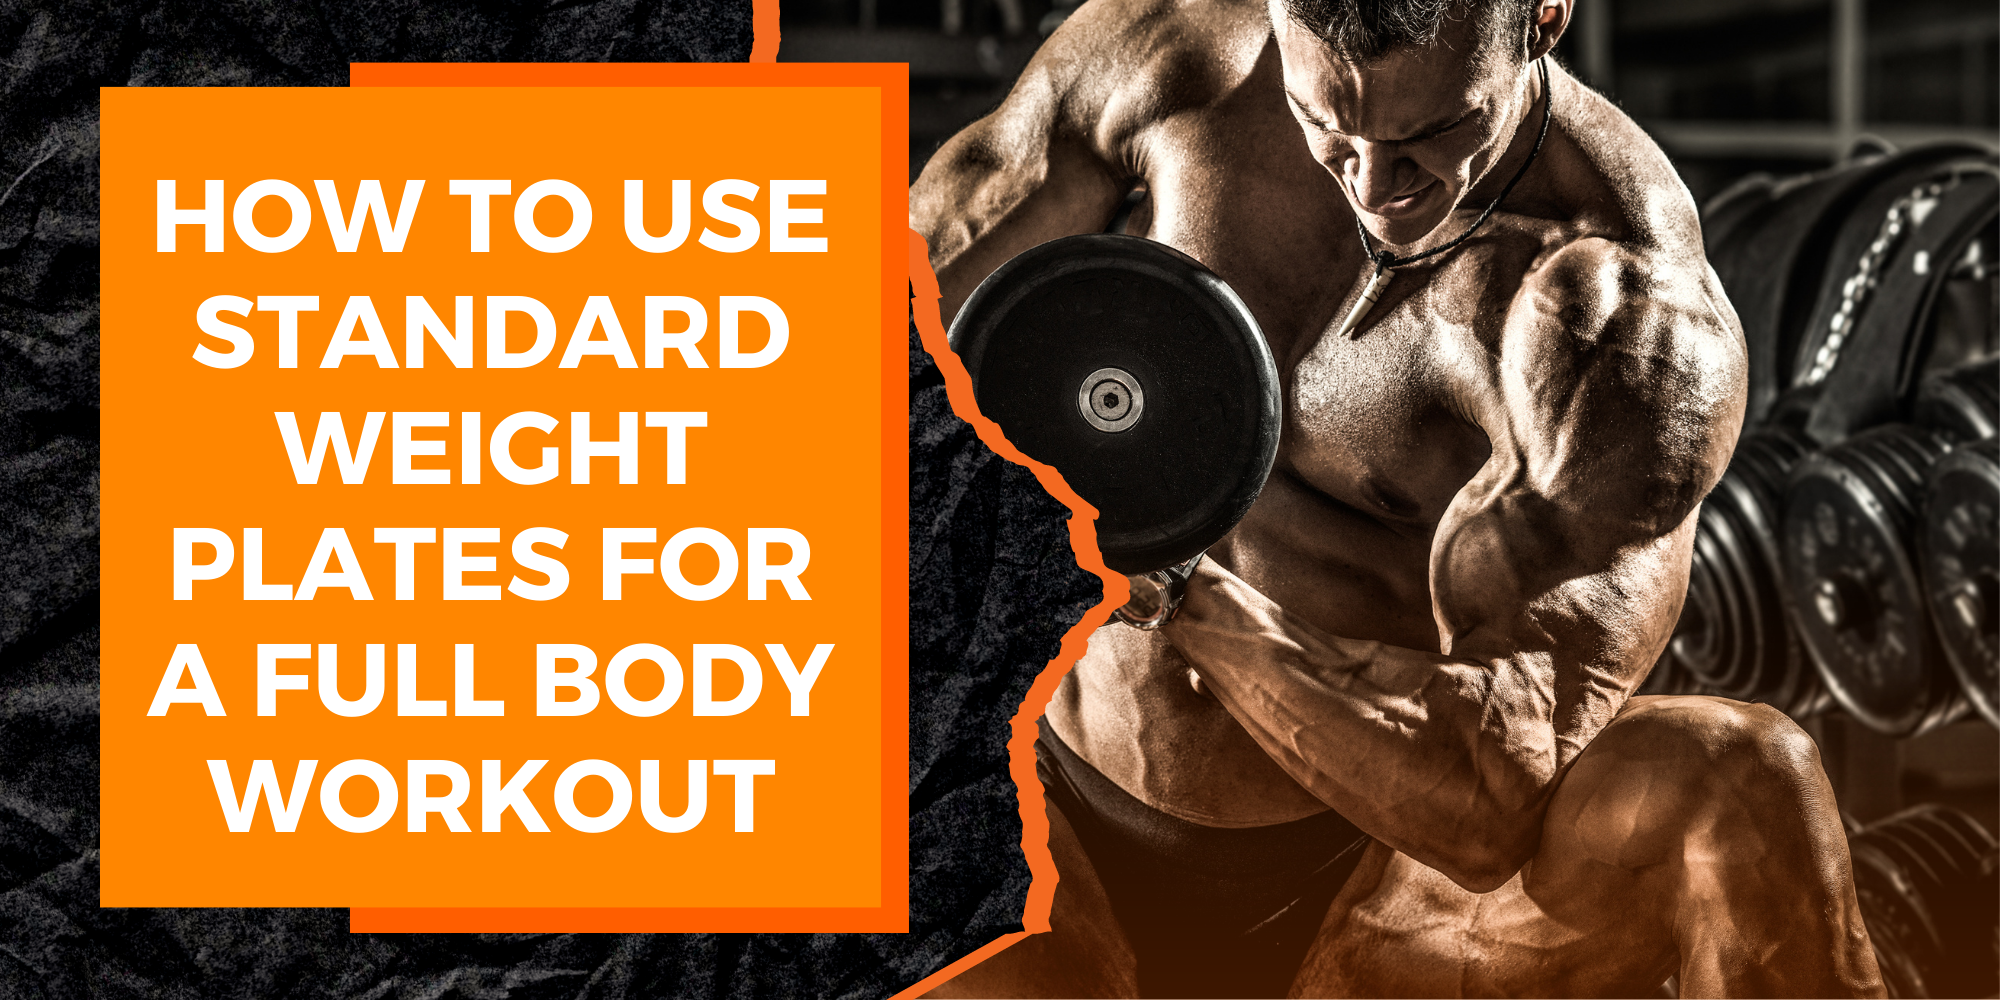 How to Use Standard Weight Plates for a Full Body Workout